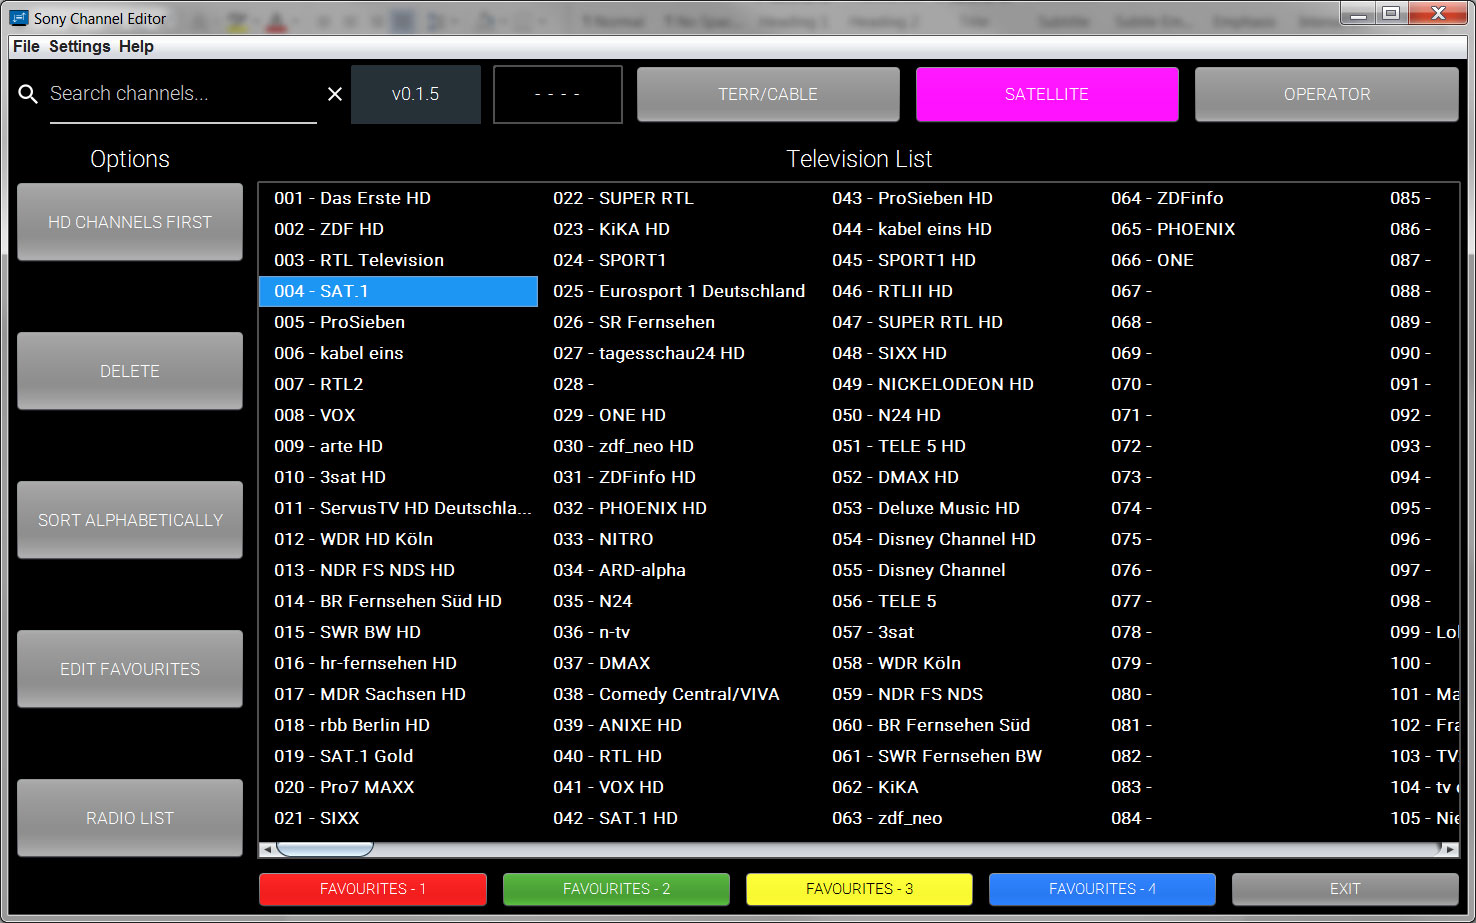 Sony releases tool to edit your TV channel list via a PC - FlatpanelsHD